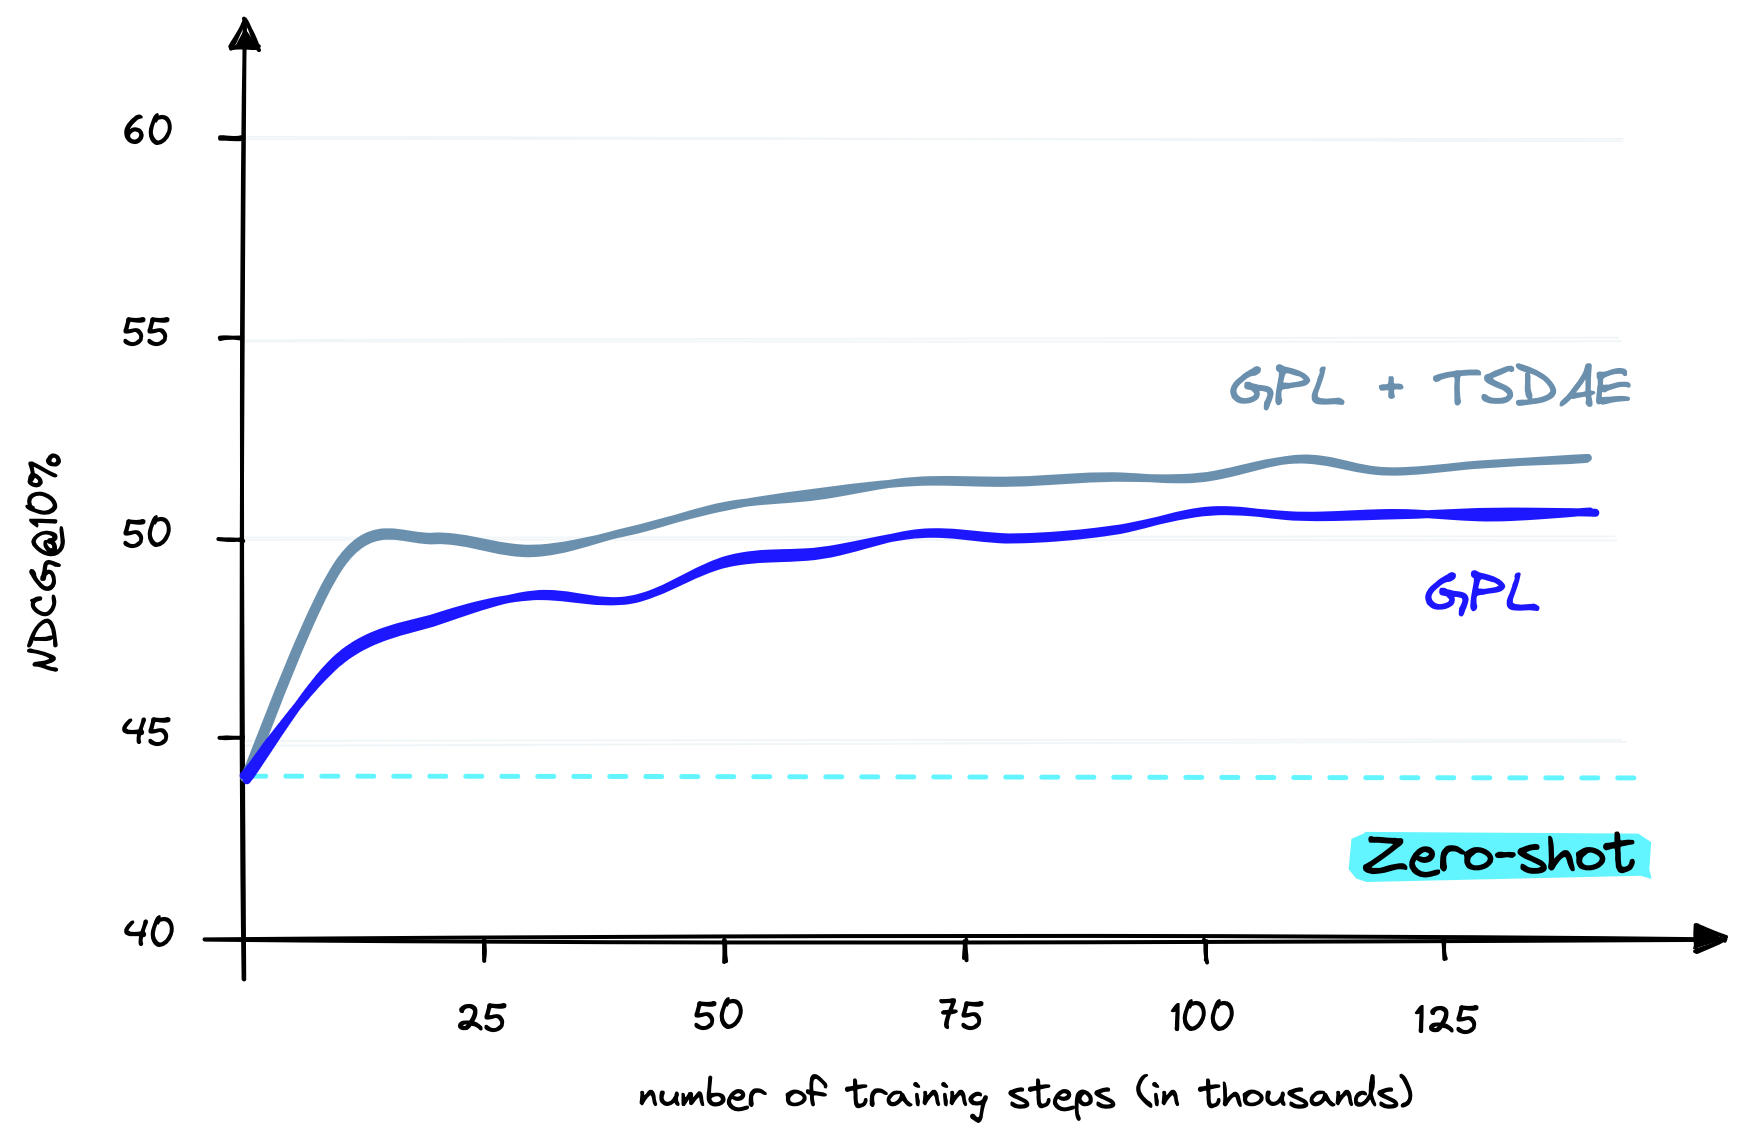 NDCG@10% performance for zero-shot (not adapted), GPL fine-tuned, and GPL fine-tuned + TSDAE pre-trained models. GPL fine-tuning using a model that had previously been pretrained using TSDAE demonstrates consistently better performance. Model performance seems to level-out after 100K training steps. Visual adapted from [2].